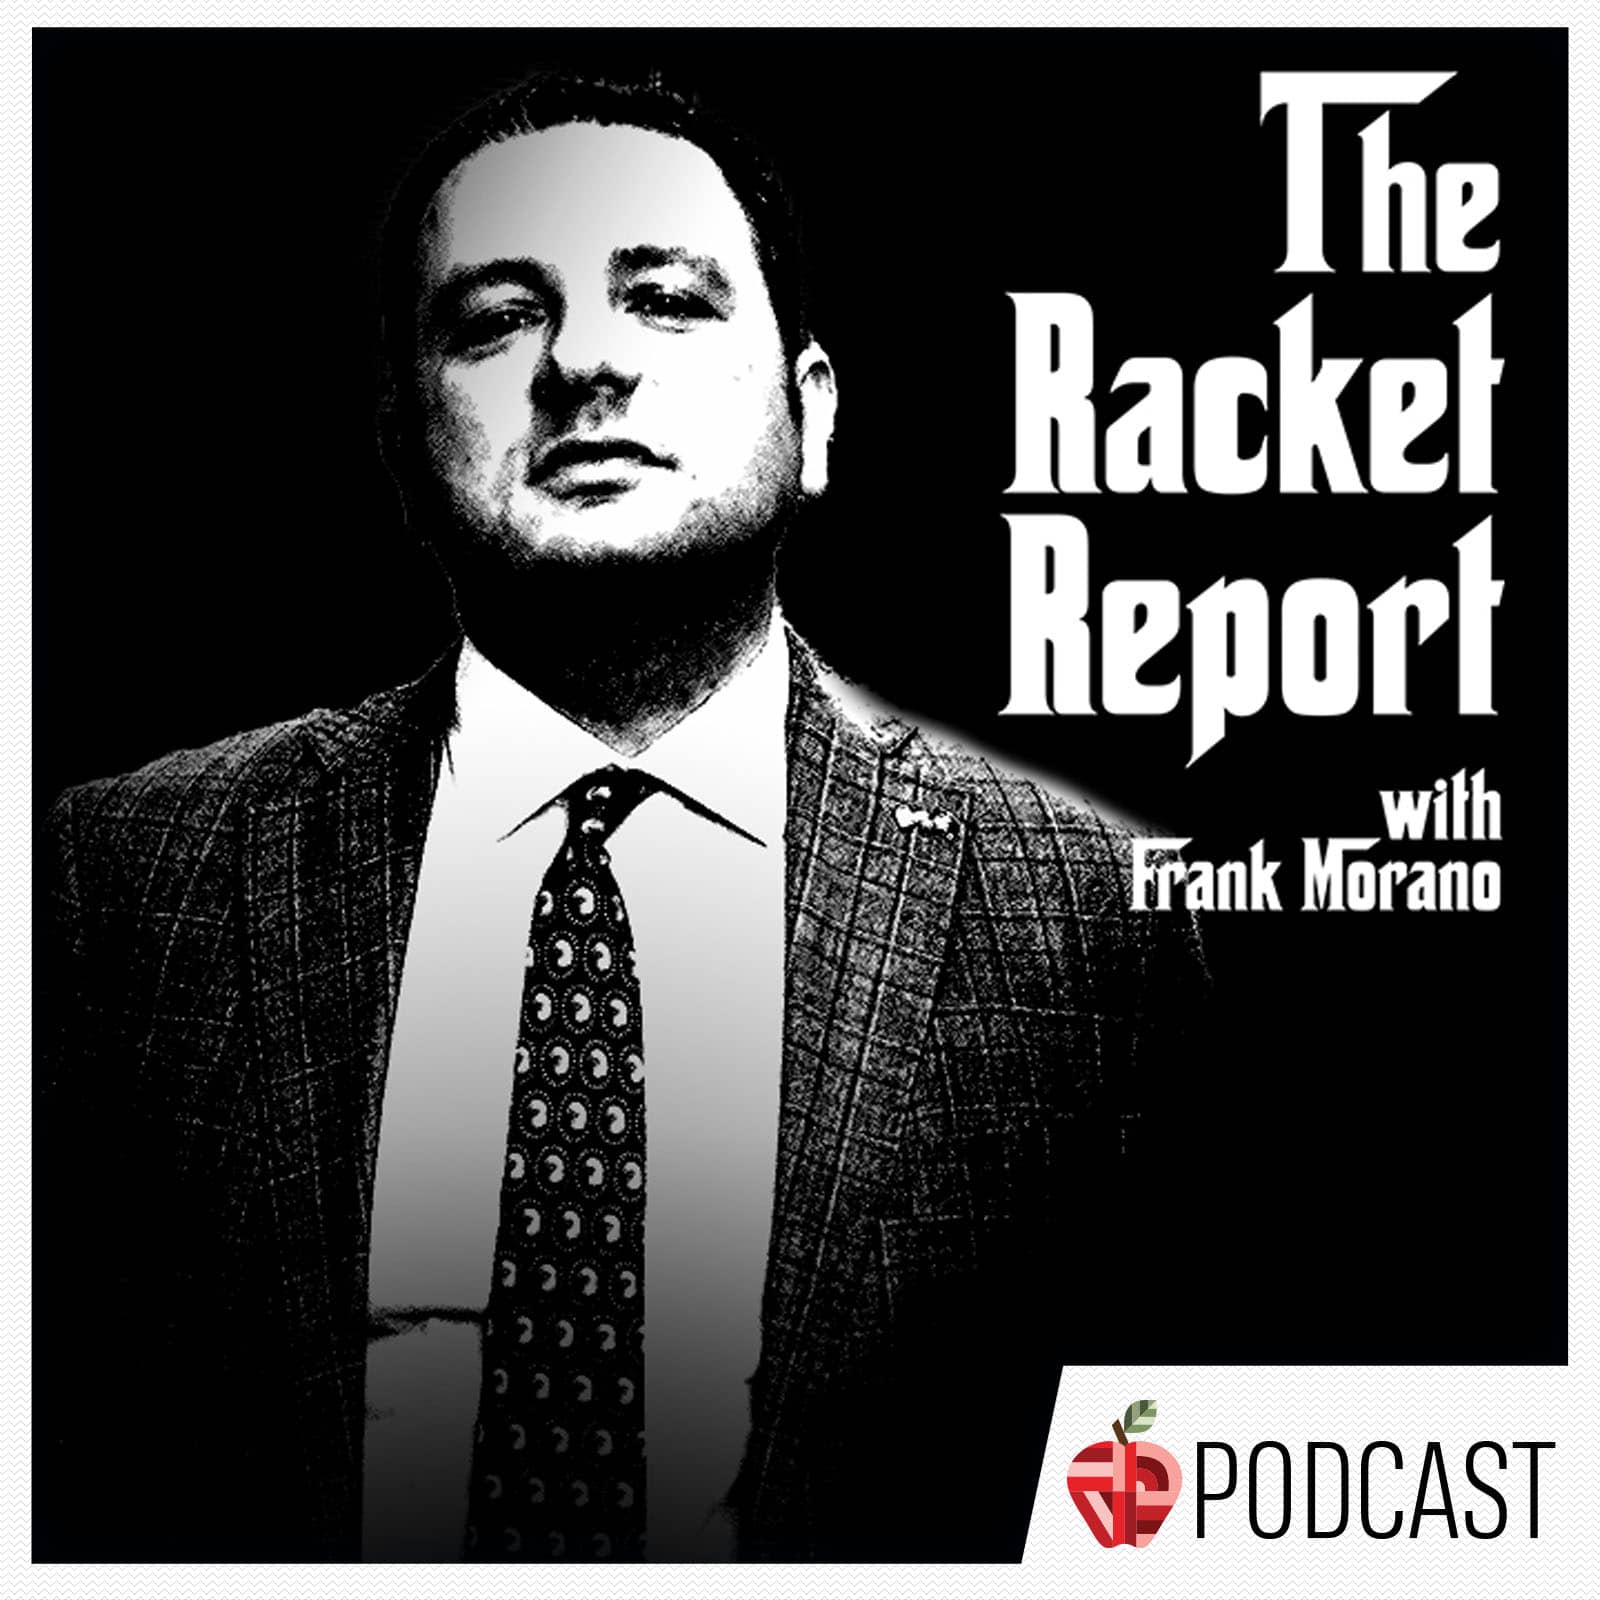 The Racket Report with Frank Morano